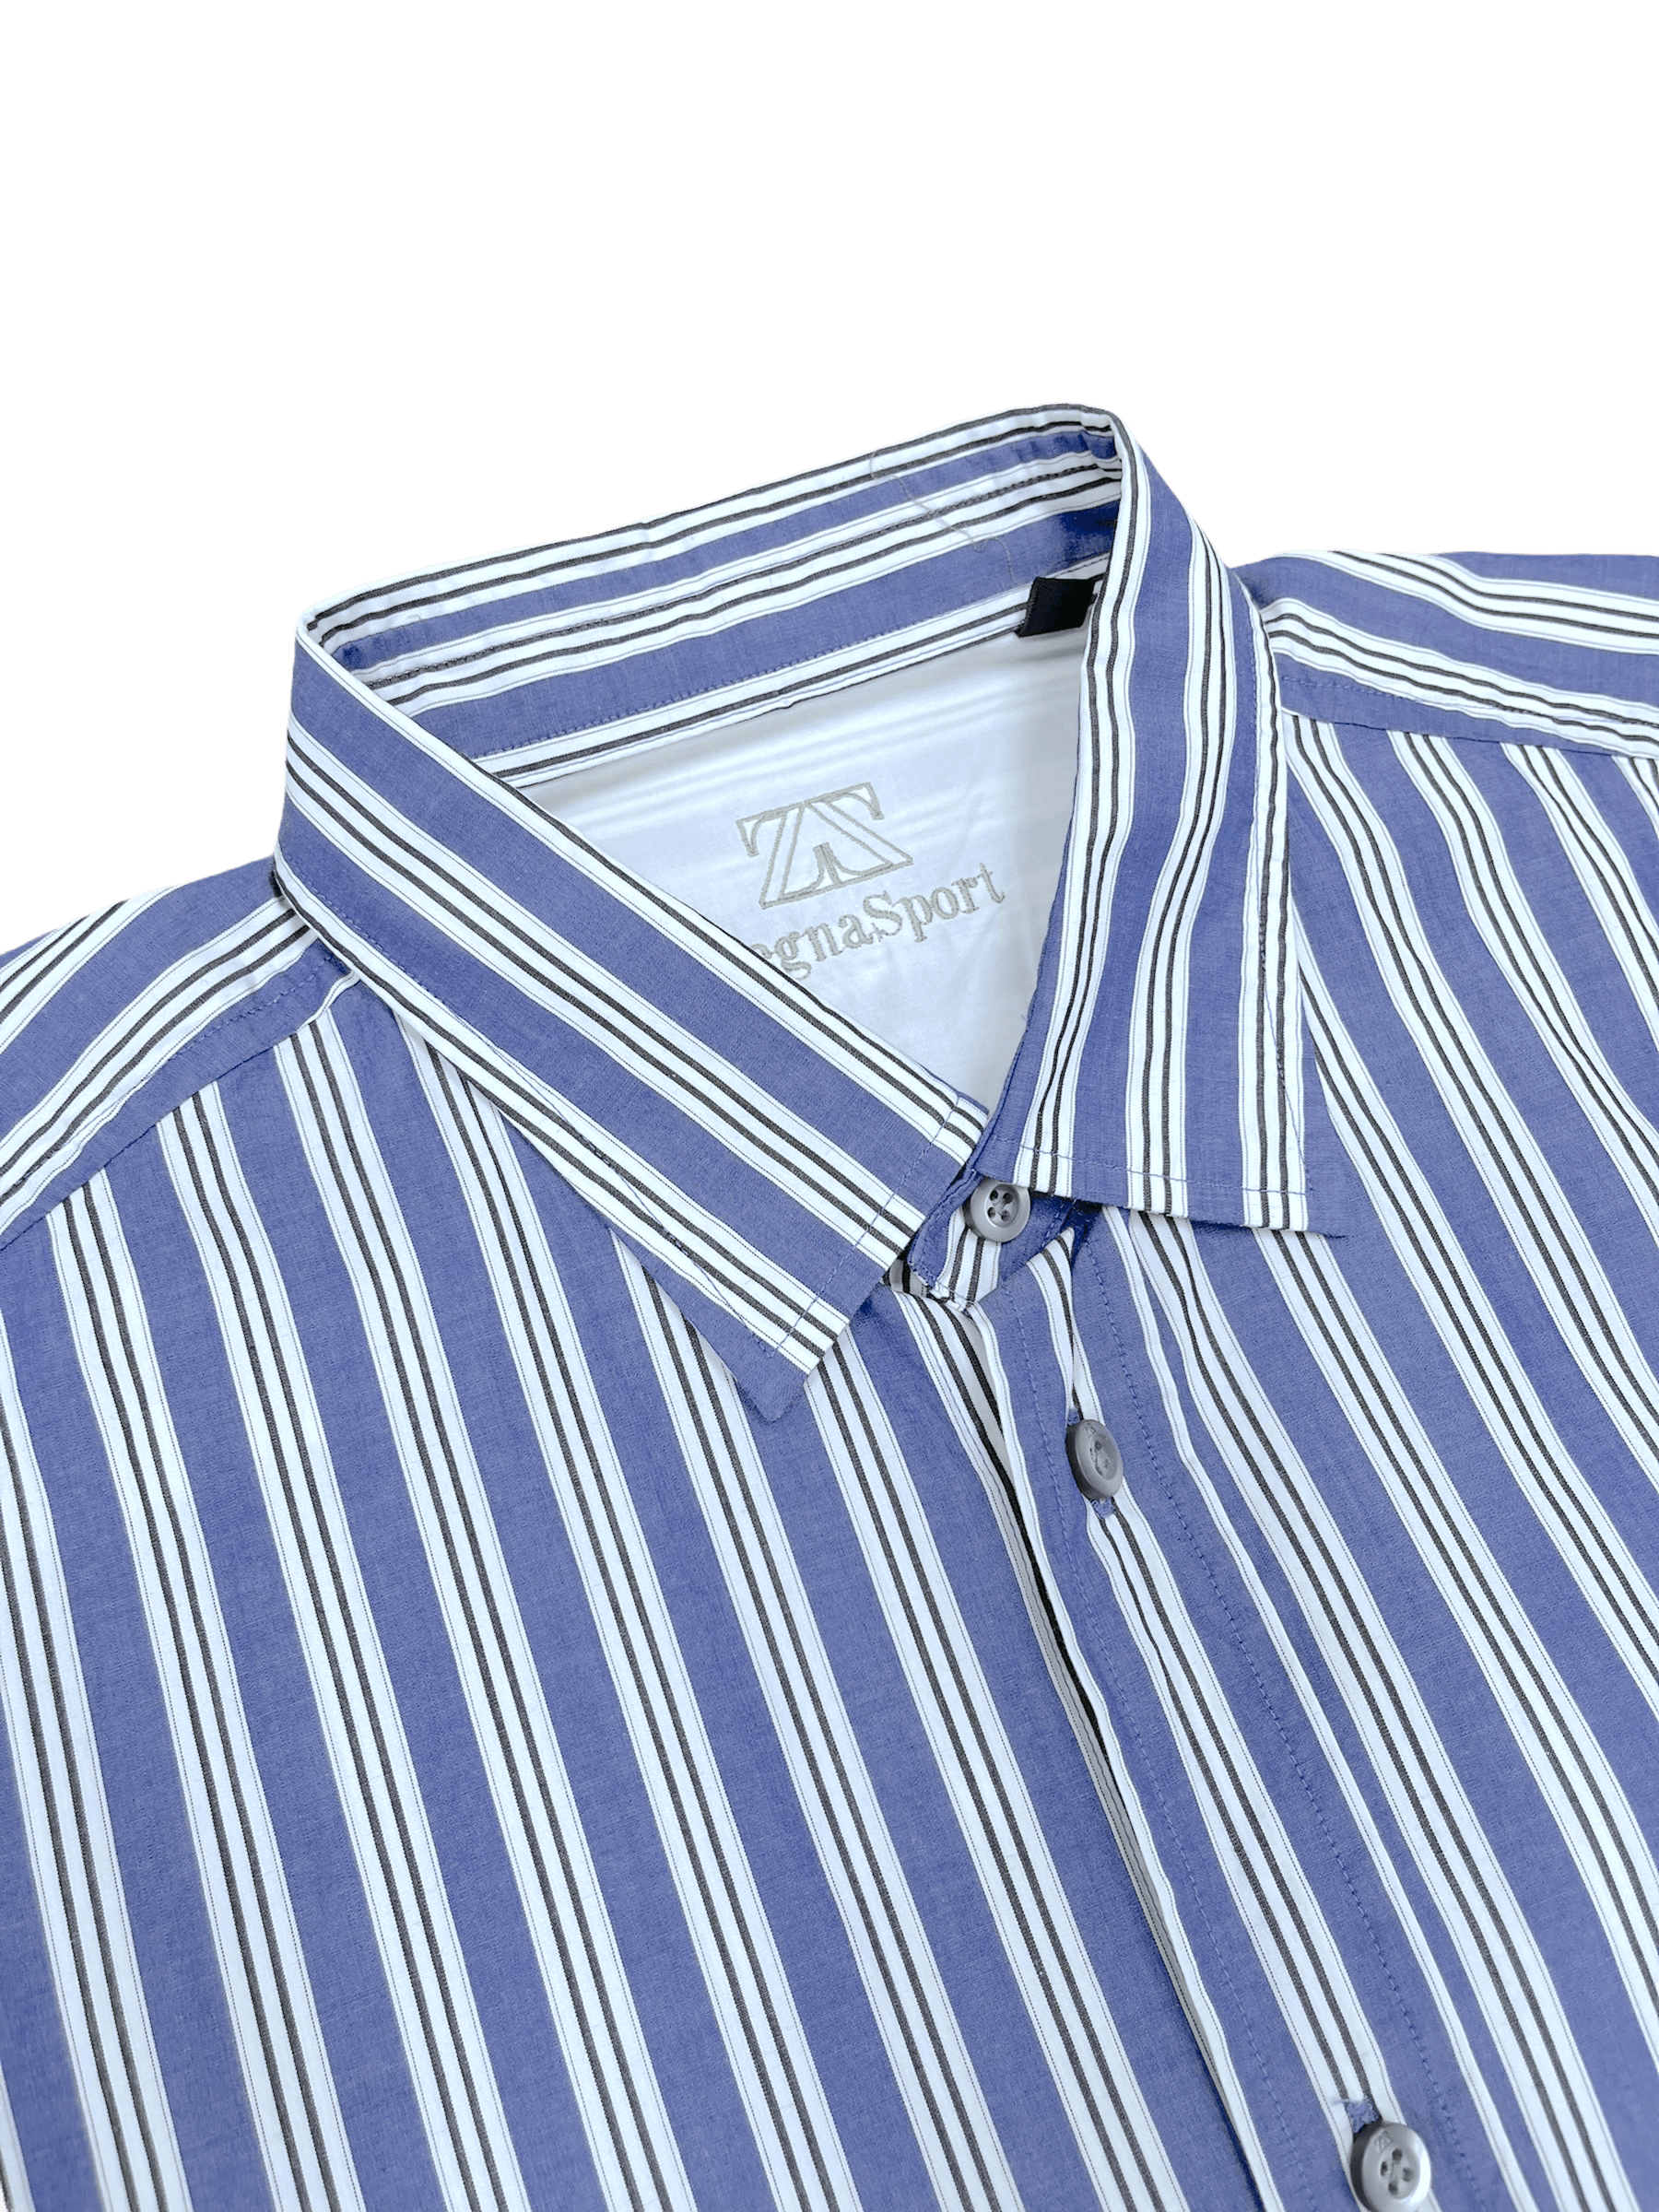 Z Zegna Teal Blue Stripe Casual Button Up Shirt—Genuine Design luxury consignment 